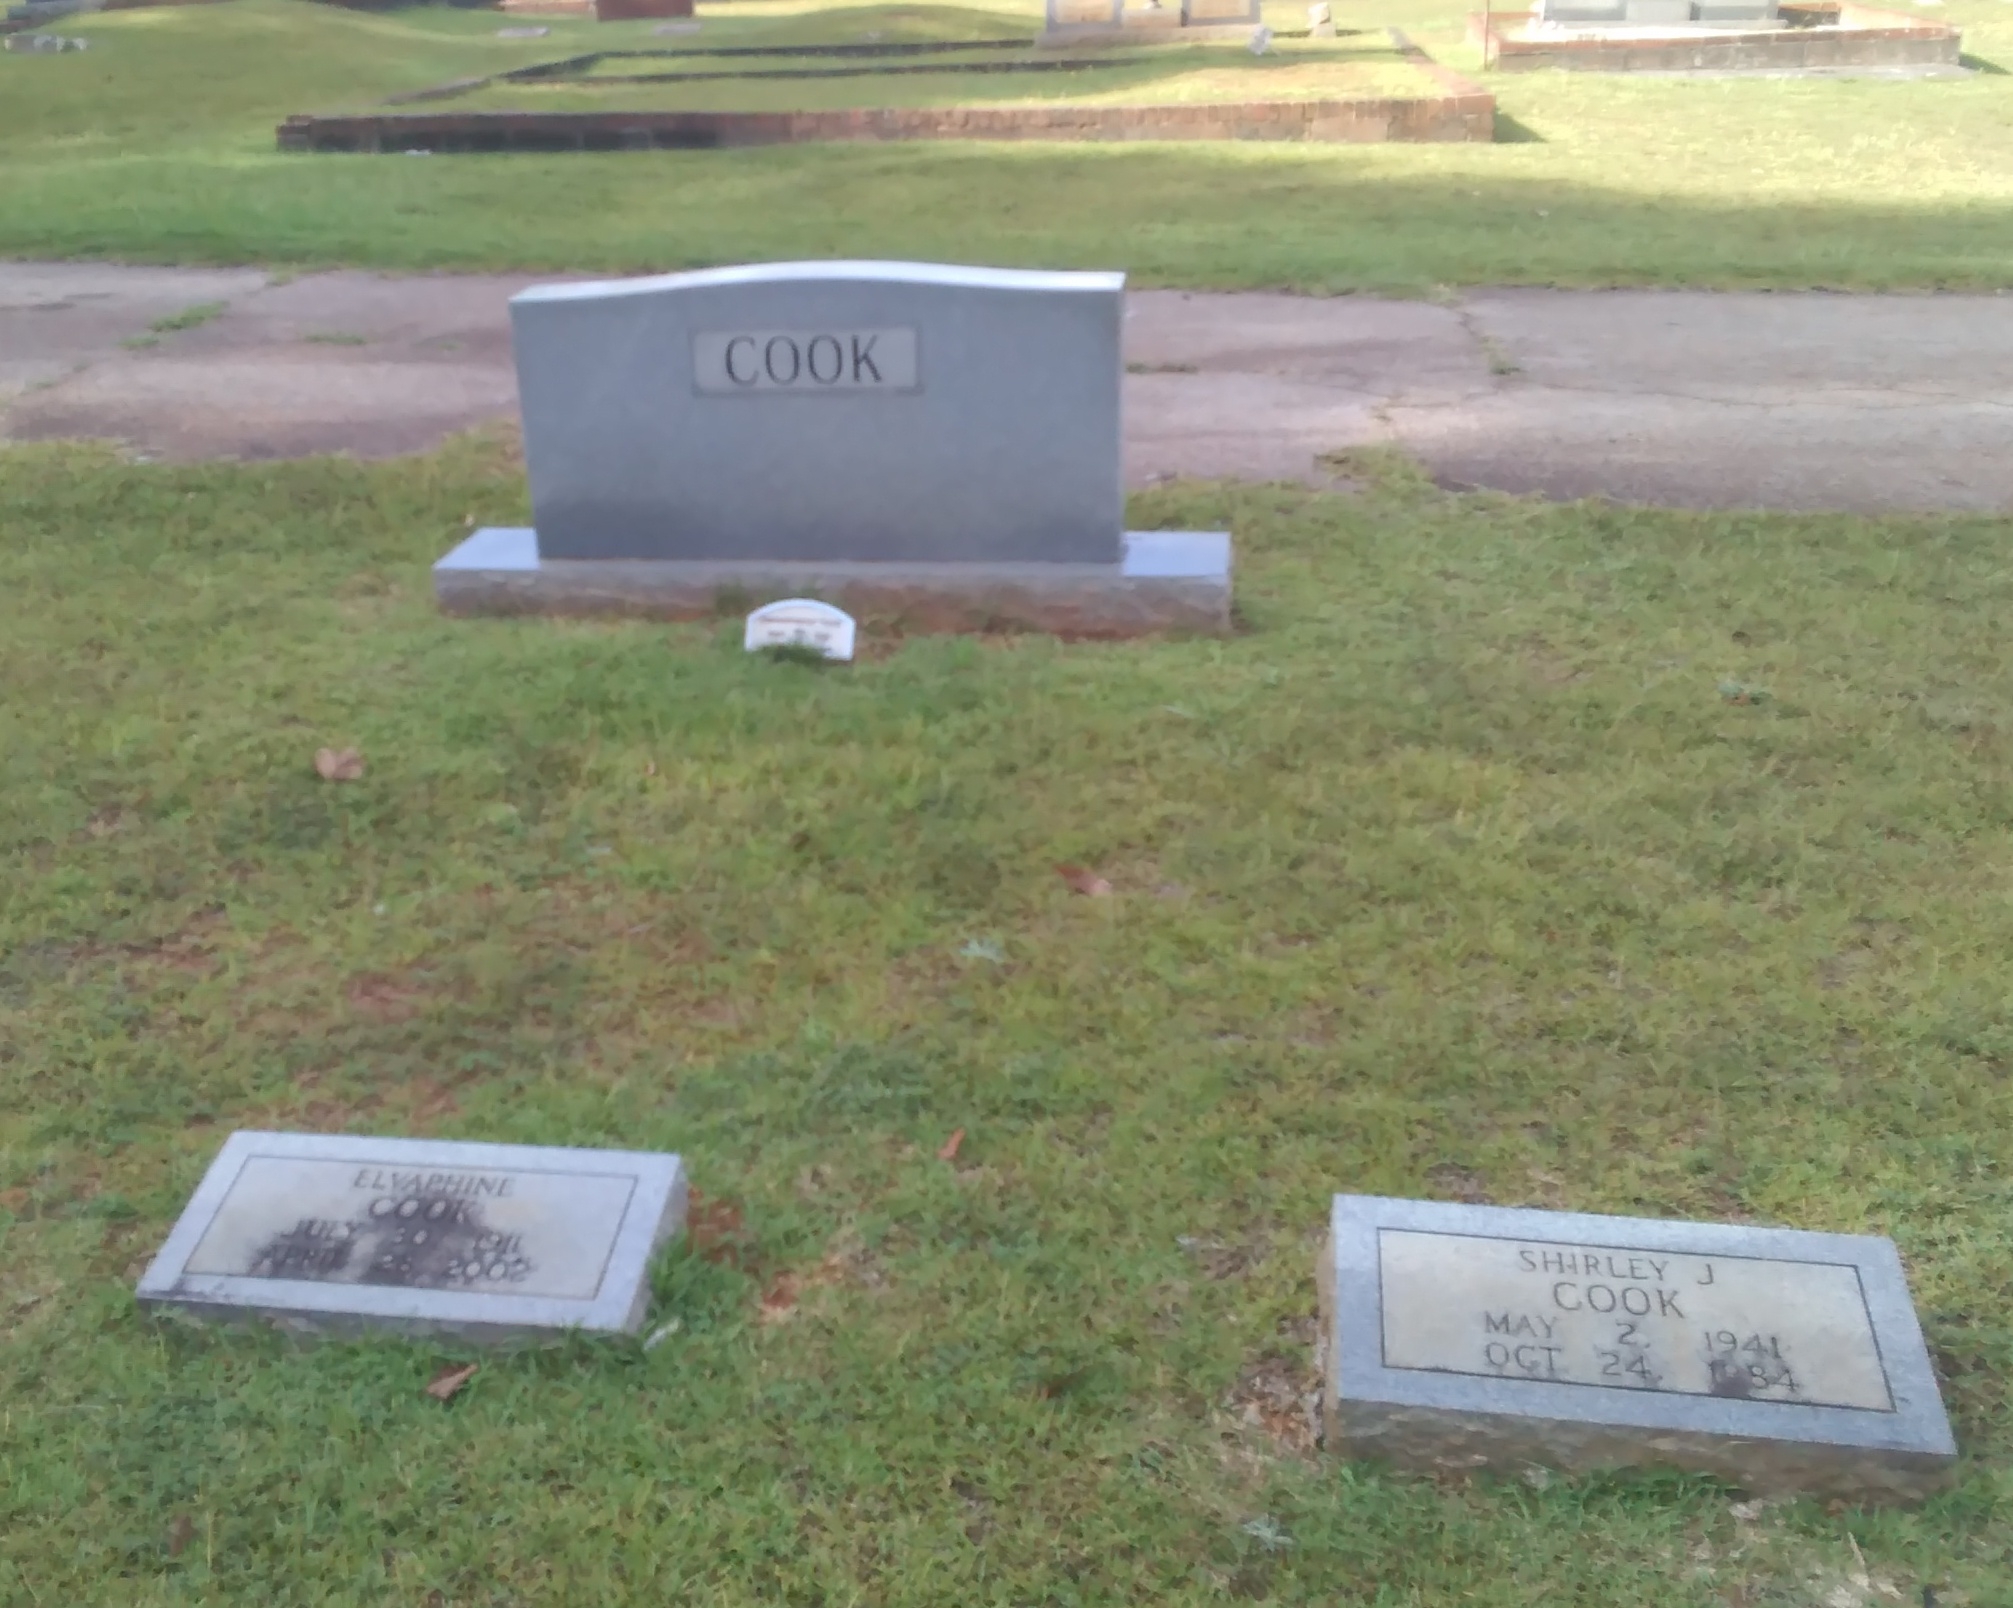 Shirley and Elvaphine (Kirby) Cook gravesite